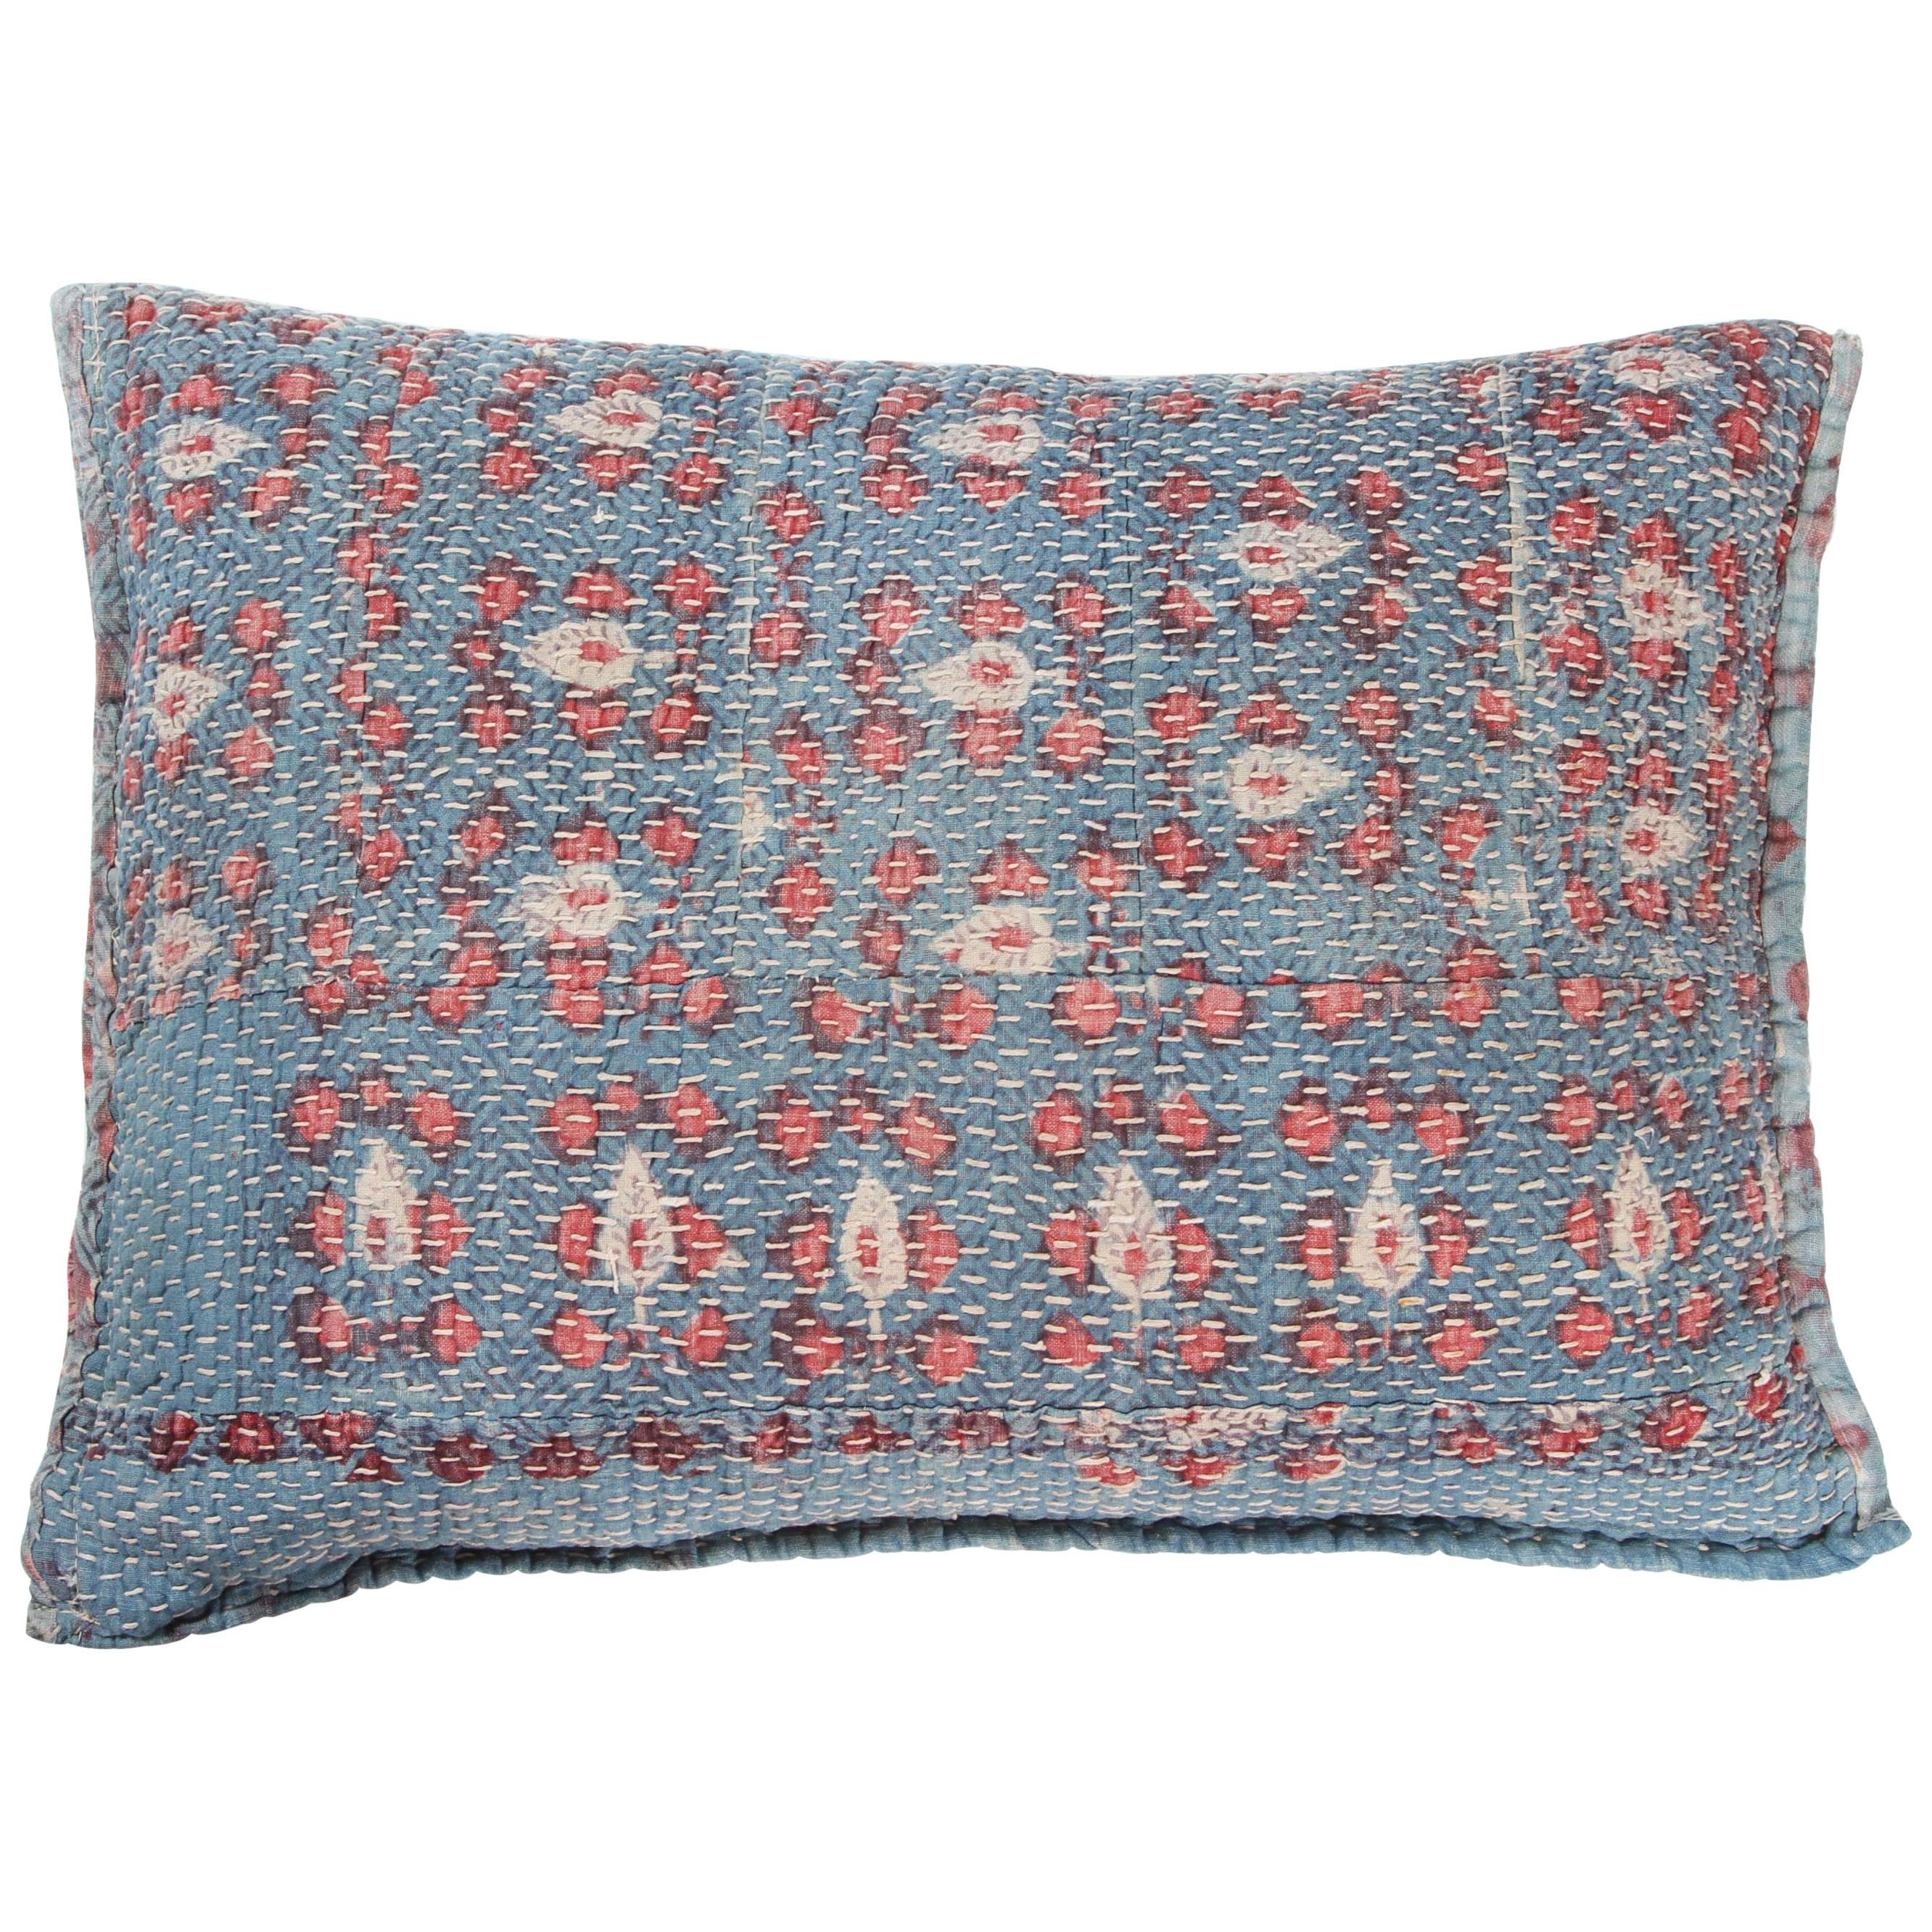 Indian Banjara Quilted Cotton Storage Bag Pillow, Red, Turquoise Blue and White For Sale